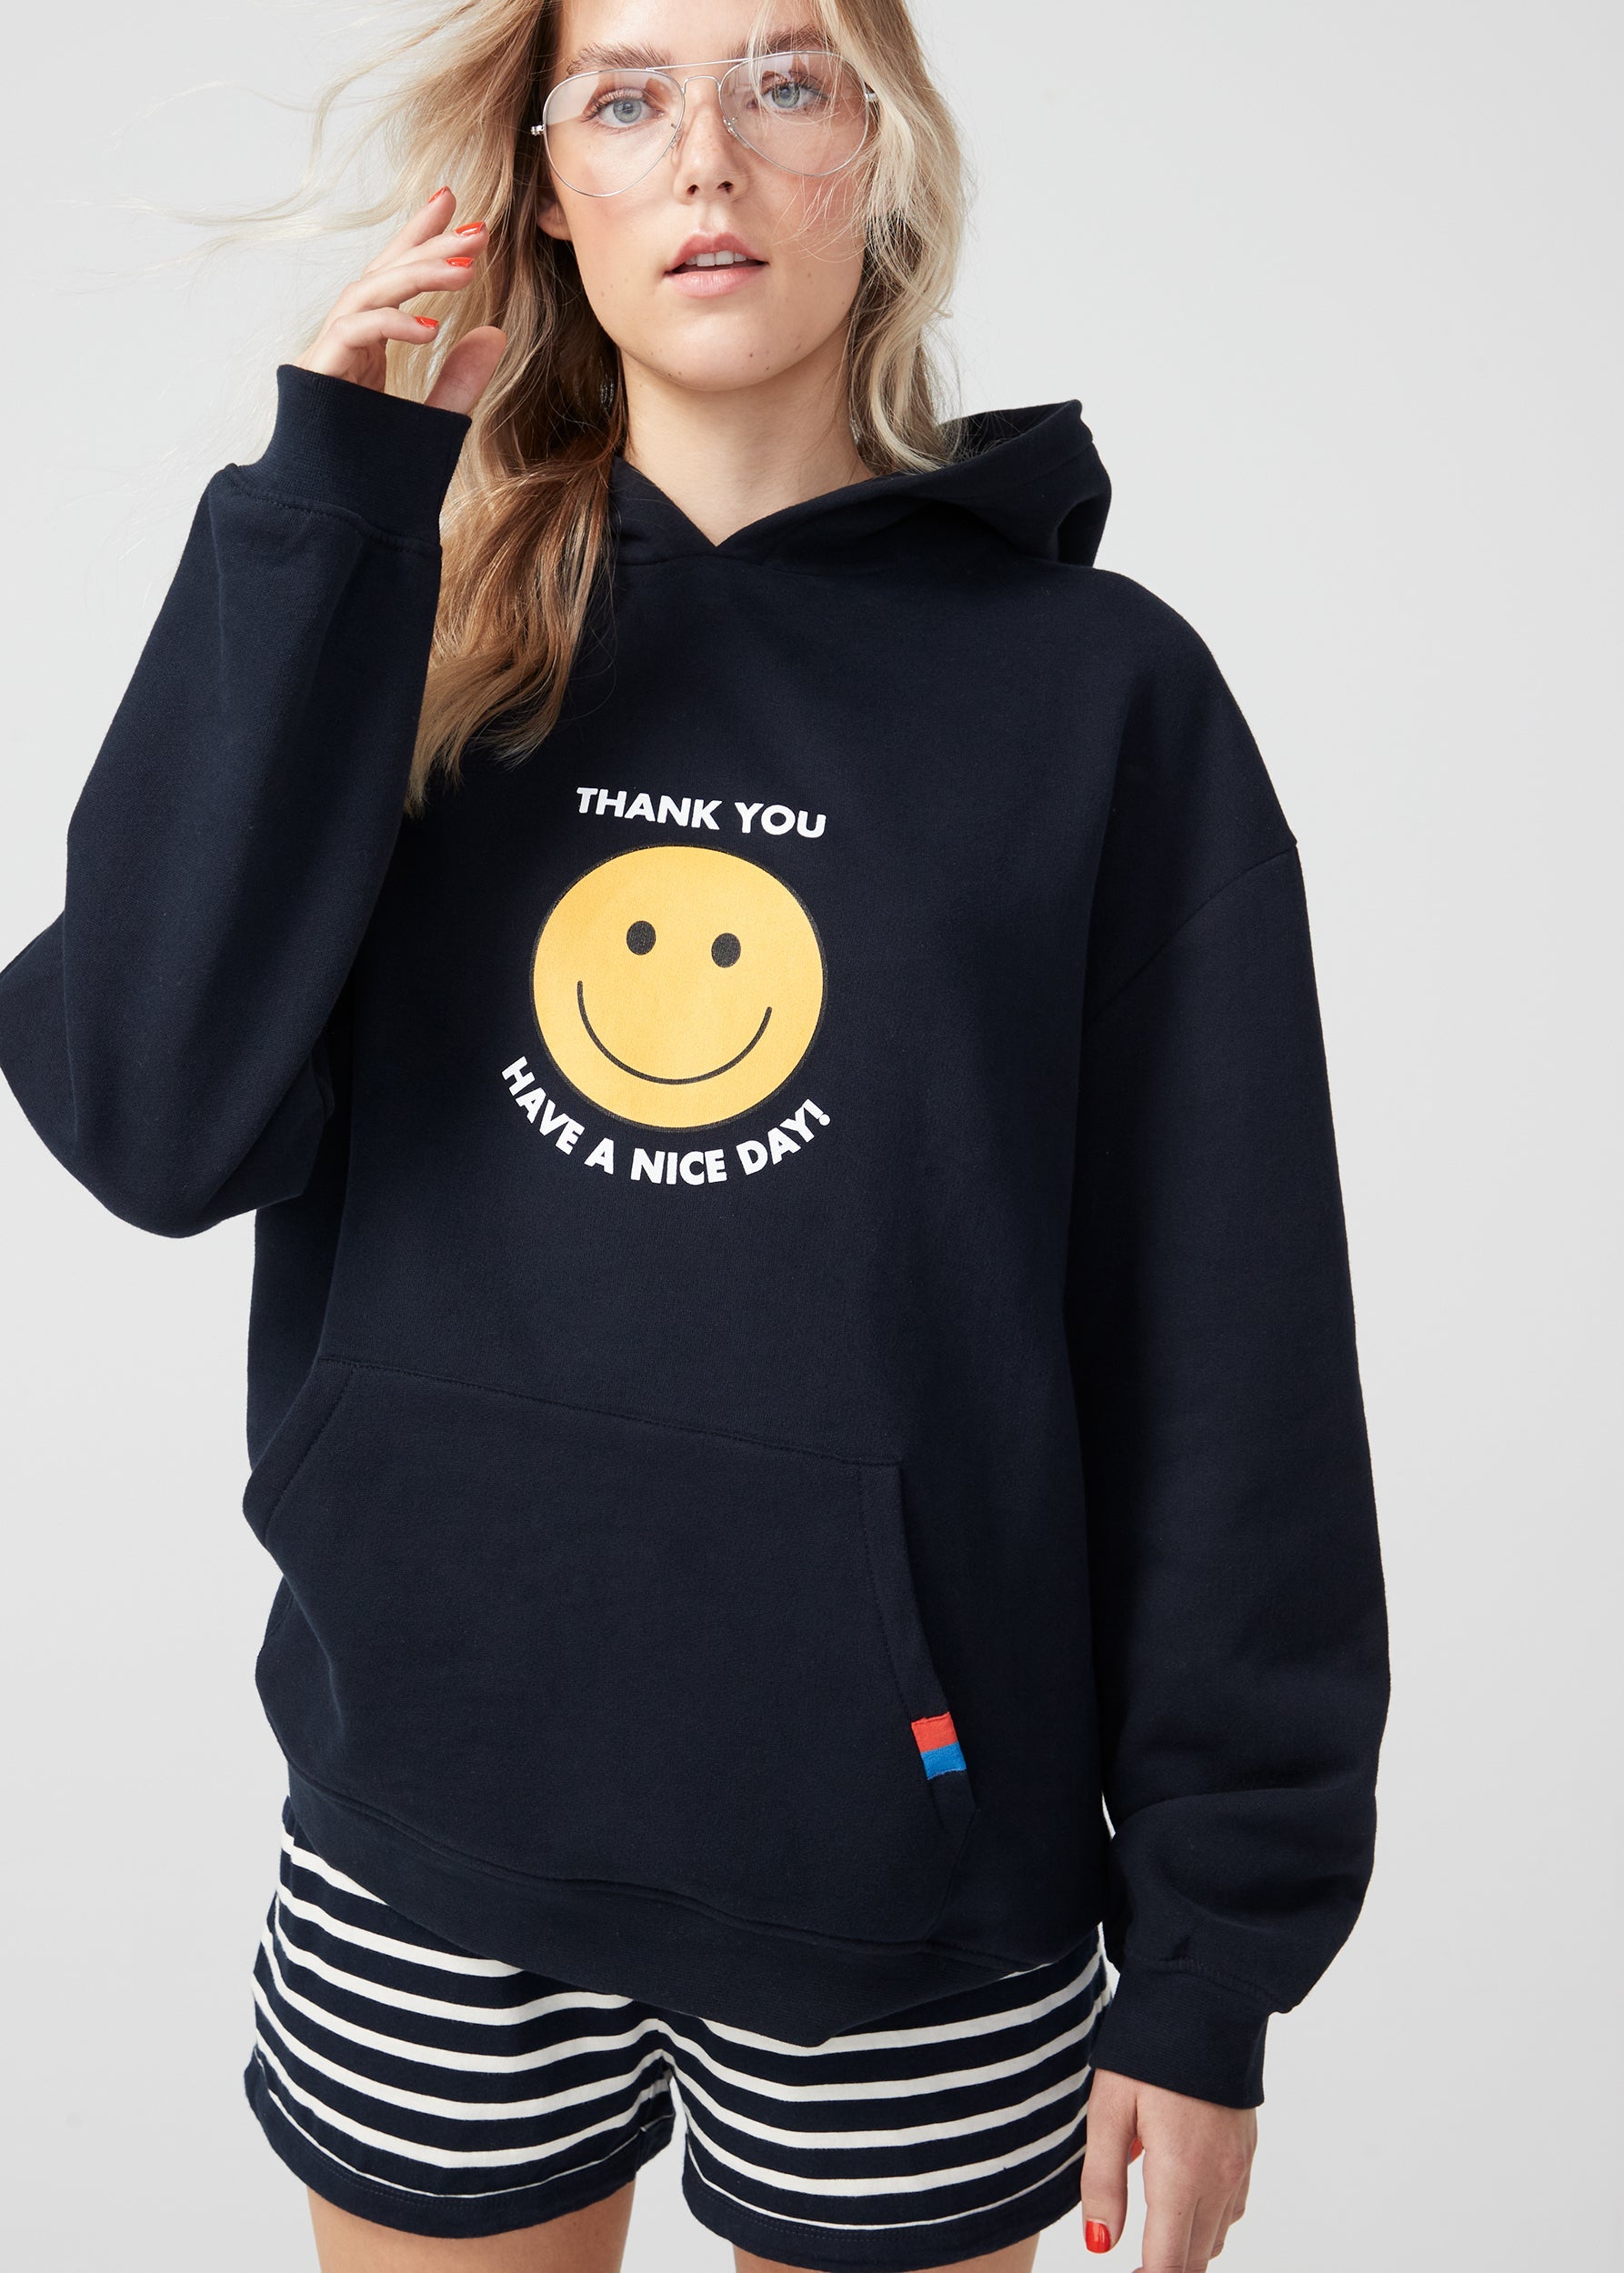 The Oversized Take Out Hoodie - Navy